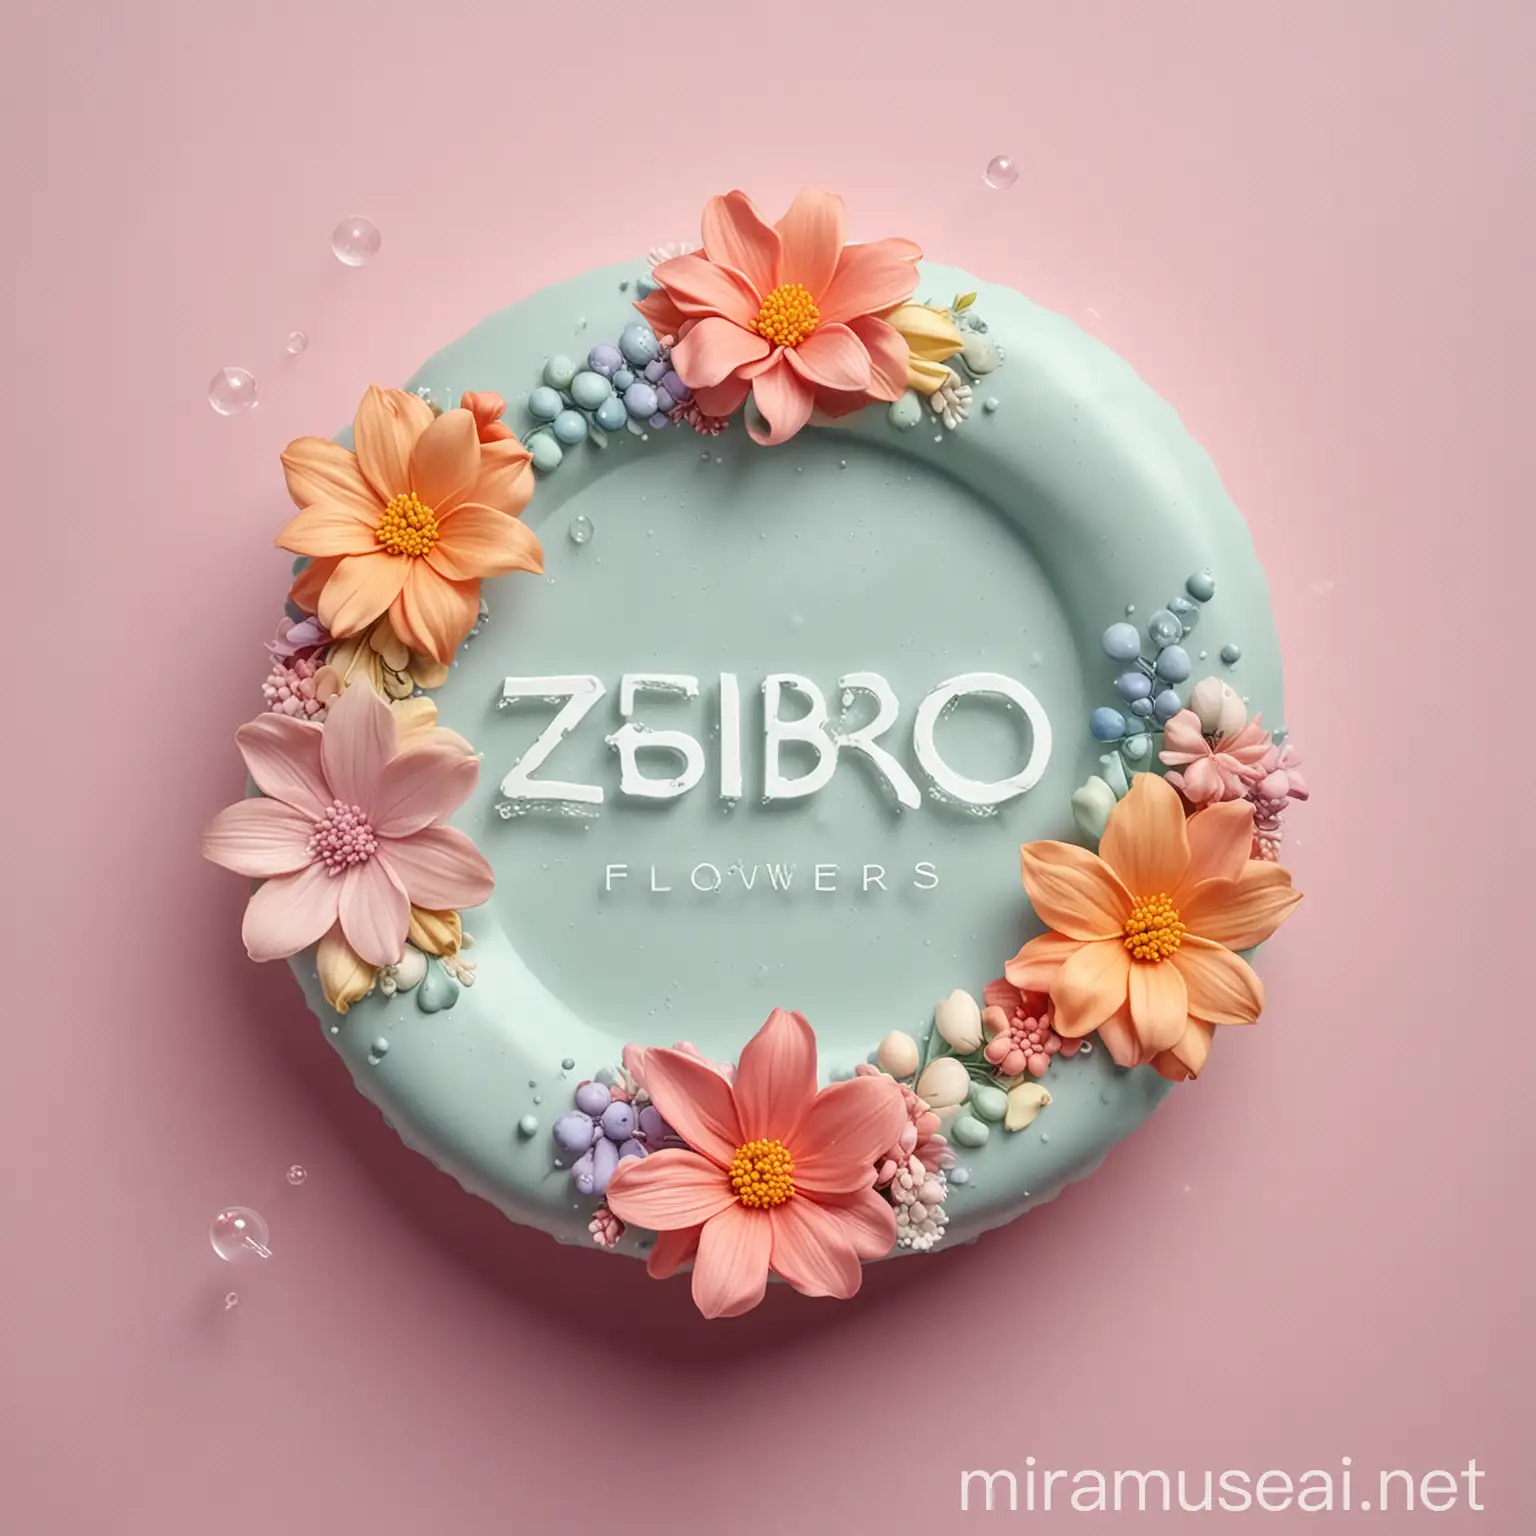 Modern Fiery Logo Design for Zebo Flowers with Soap Bubbles and Pastel Colors